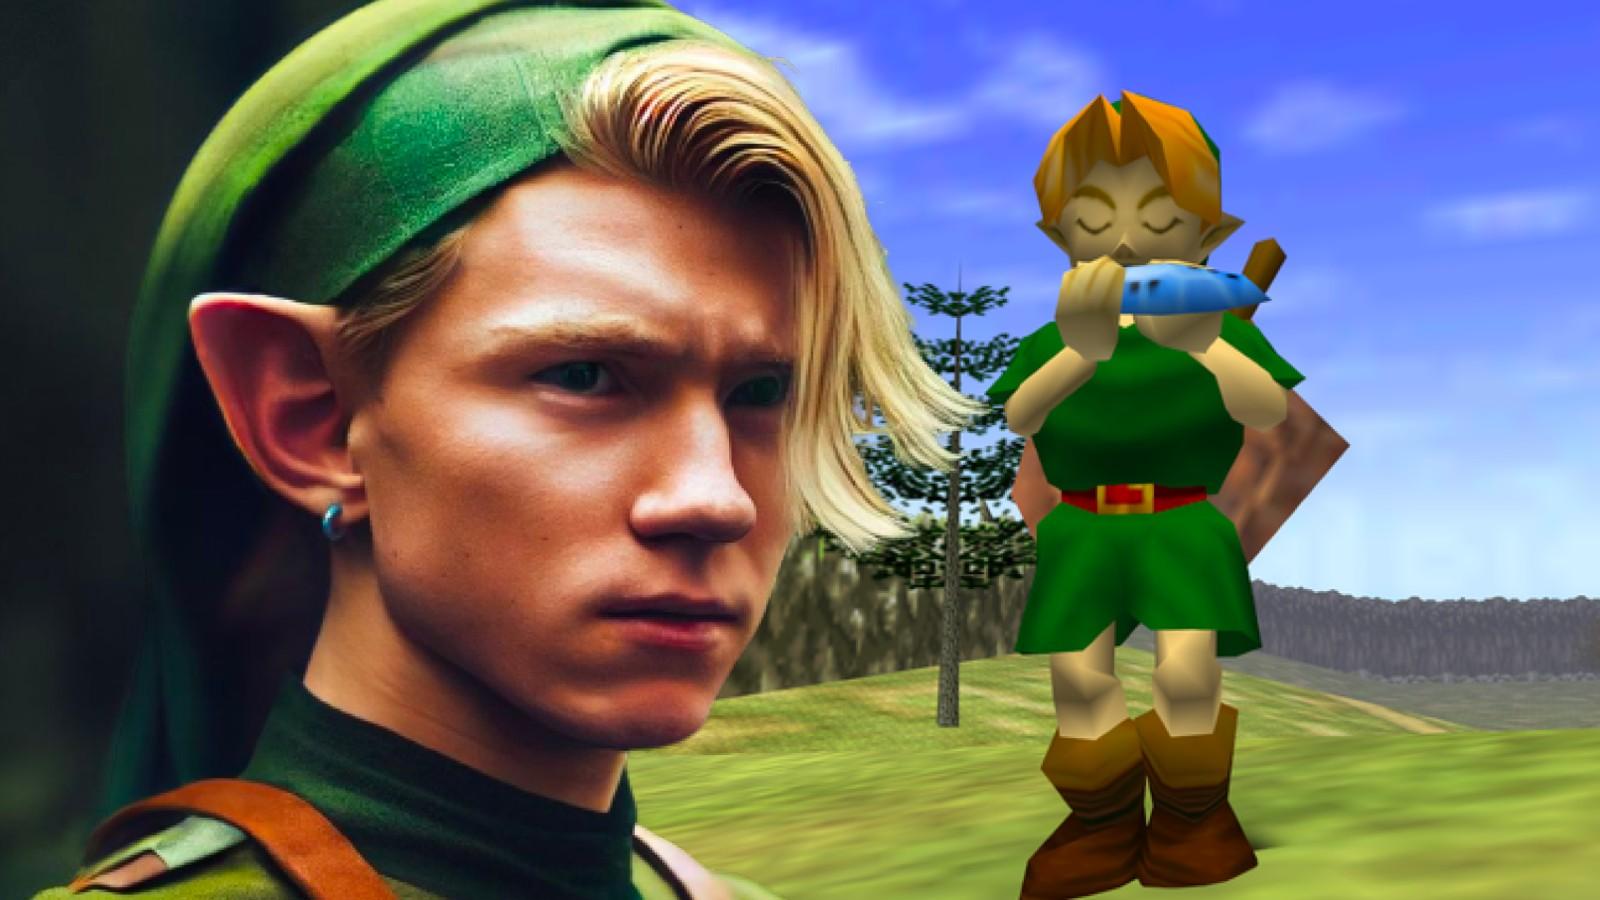 Zelda fans beg Nintendo not to cast Tom Holland as Link in new movie